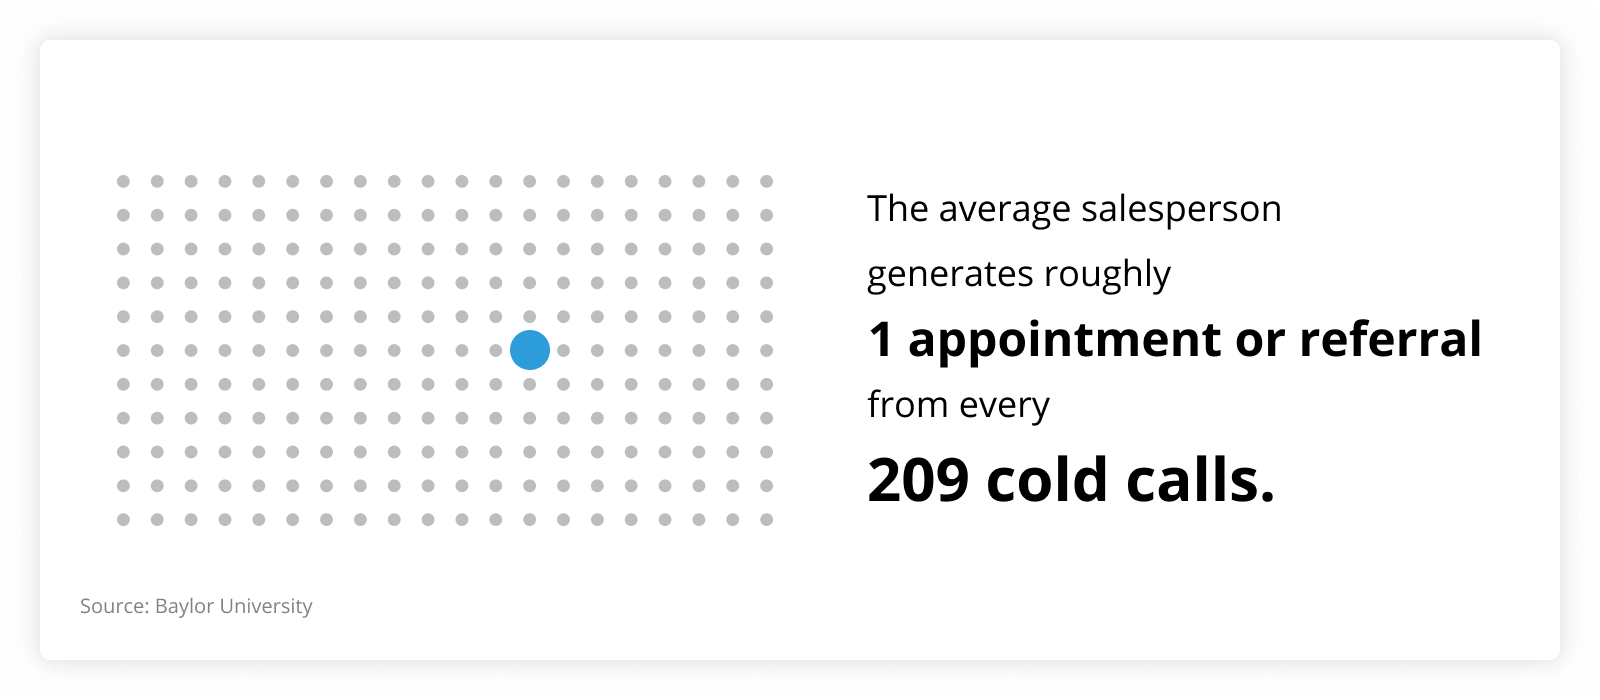 graph showing that The average salesperson generates roughly one appointment or referral from every 209 cold calls.